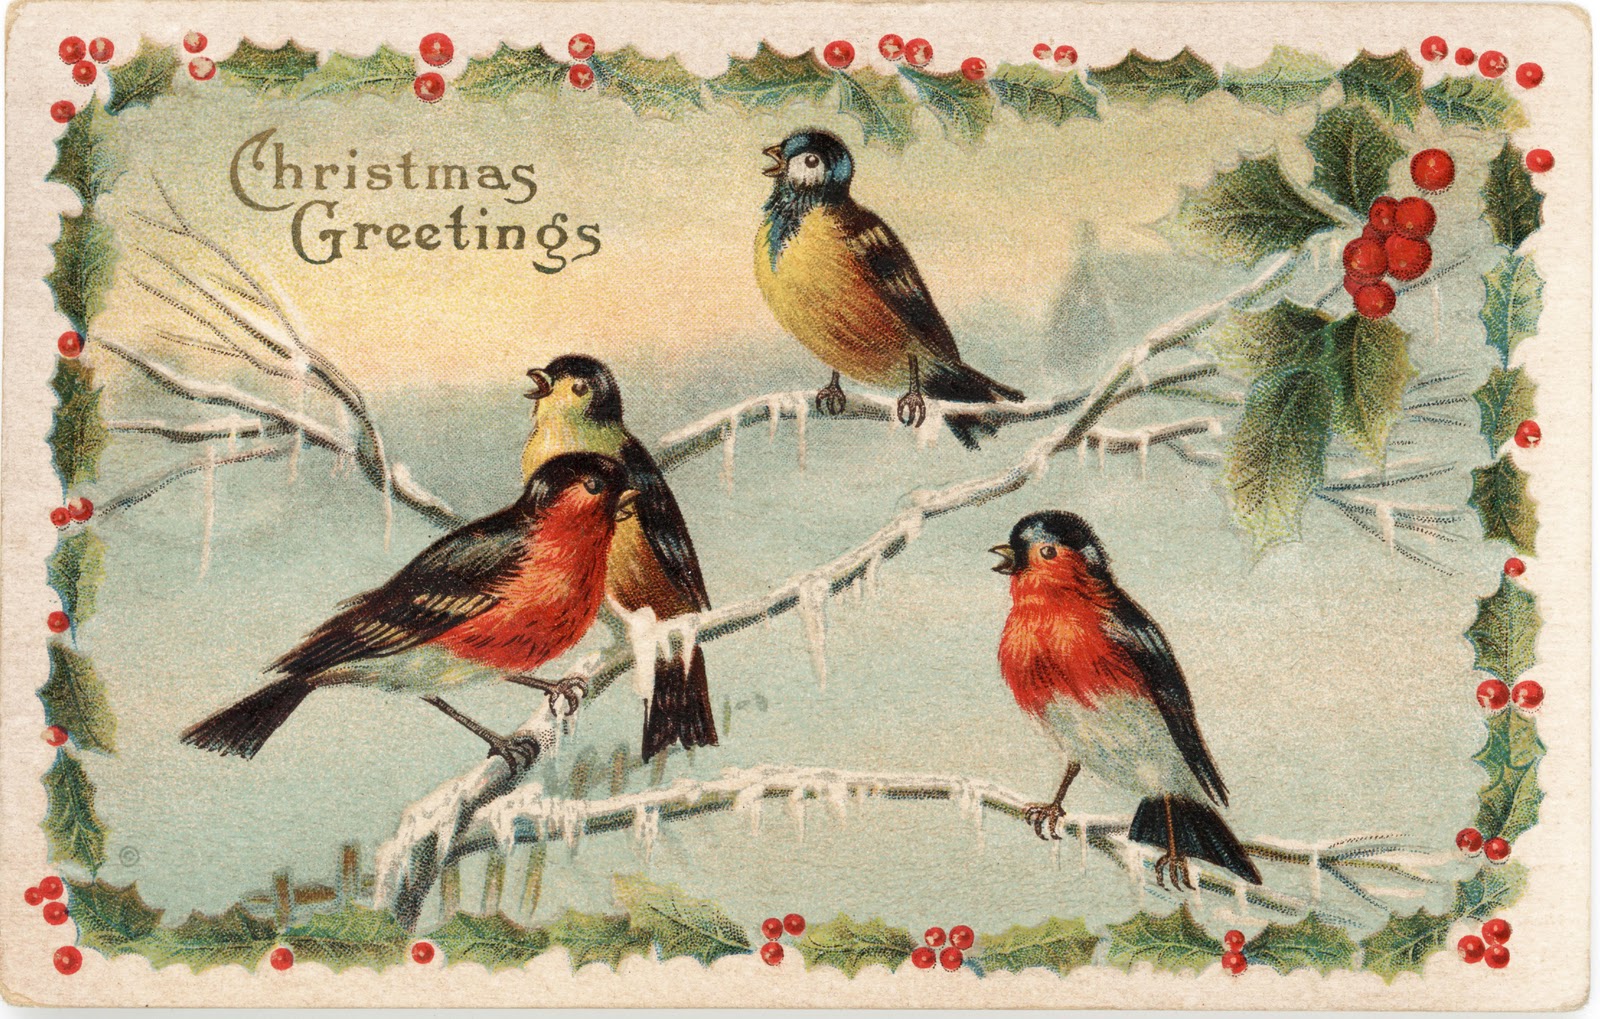 ANTIQUE CARD HOLIDAY POST | ANTIQUES CENTER